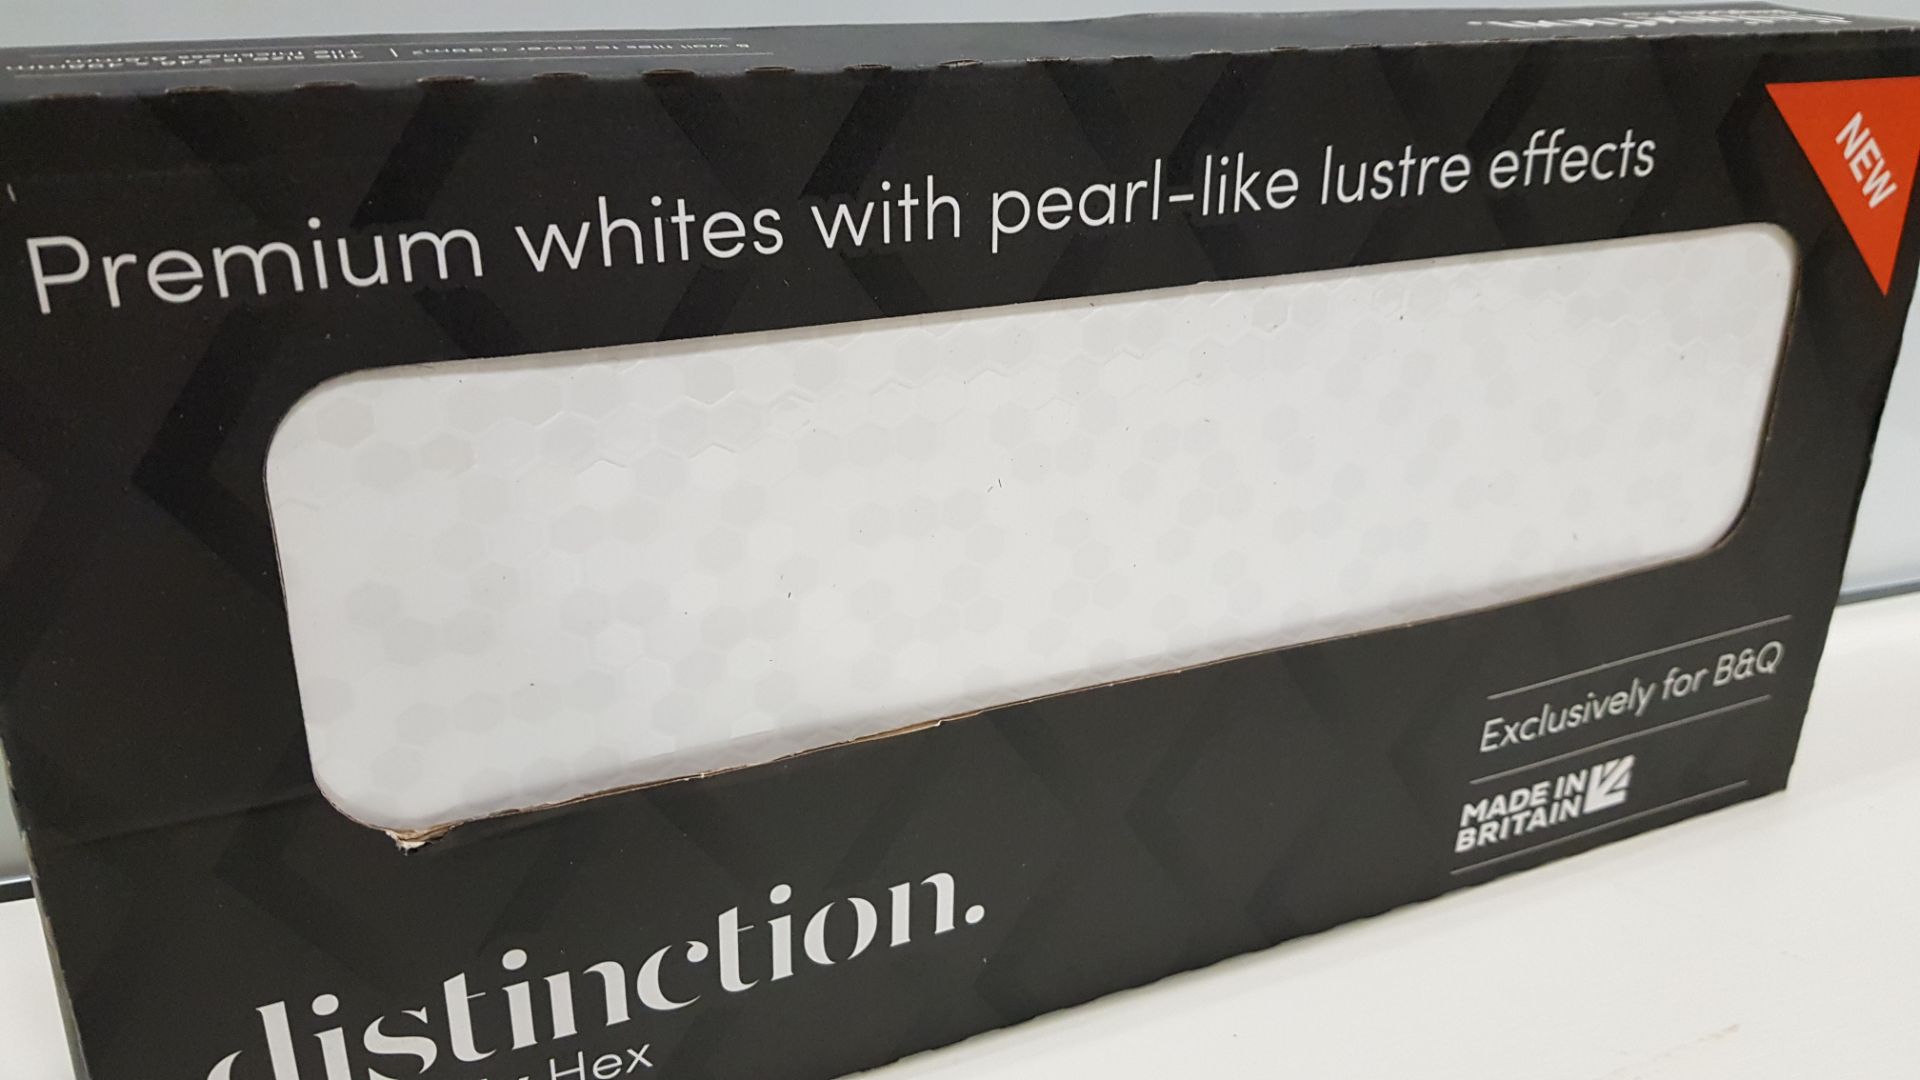 50 X PACKS OF 8 DISTINCTION SIMPLICITY HEX PREMIUM WHITES WITH PEARL - LIKE LUSTRE EFFECT (248 X